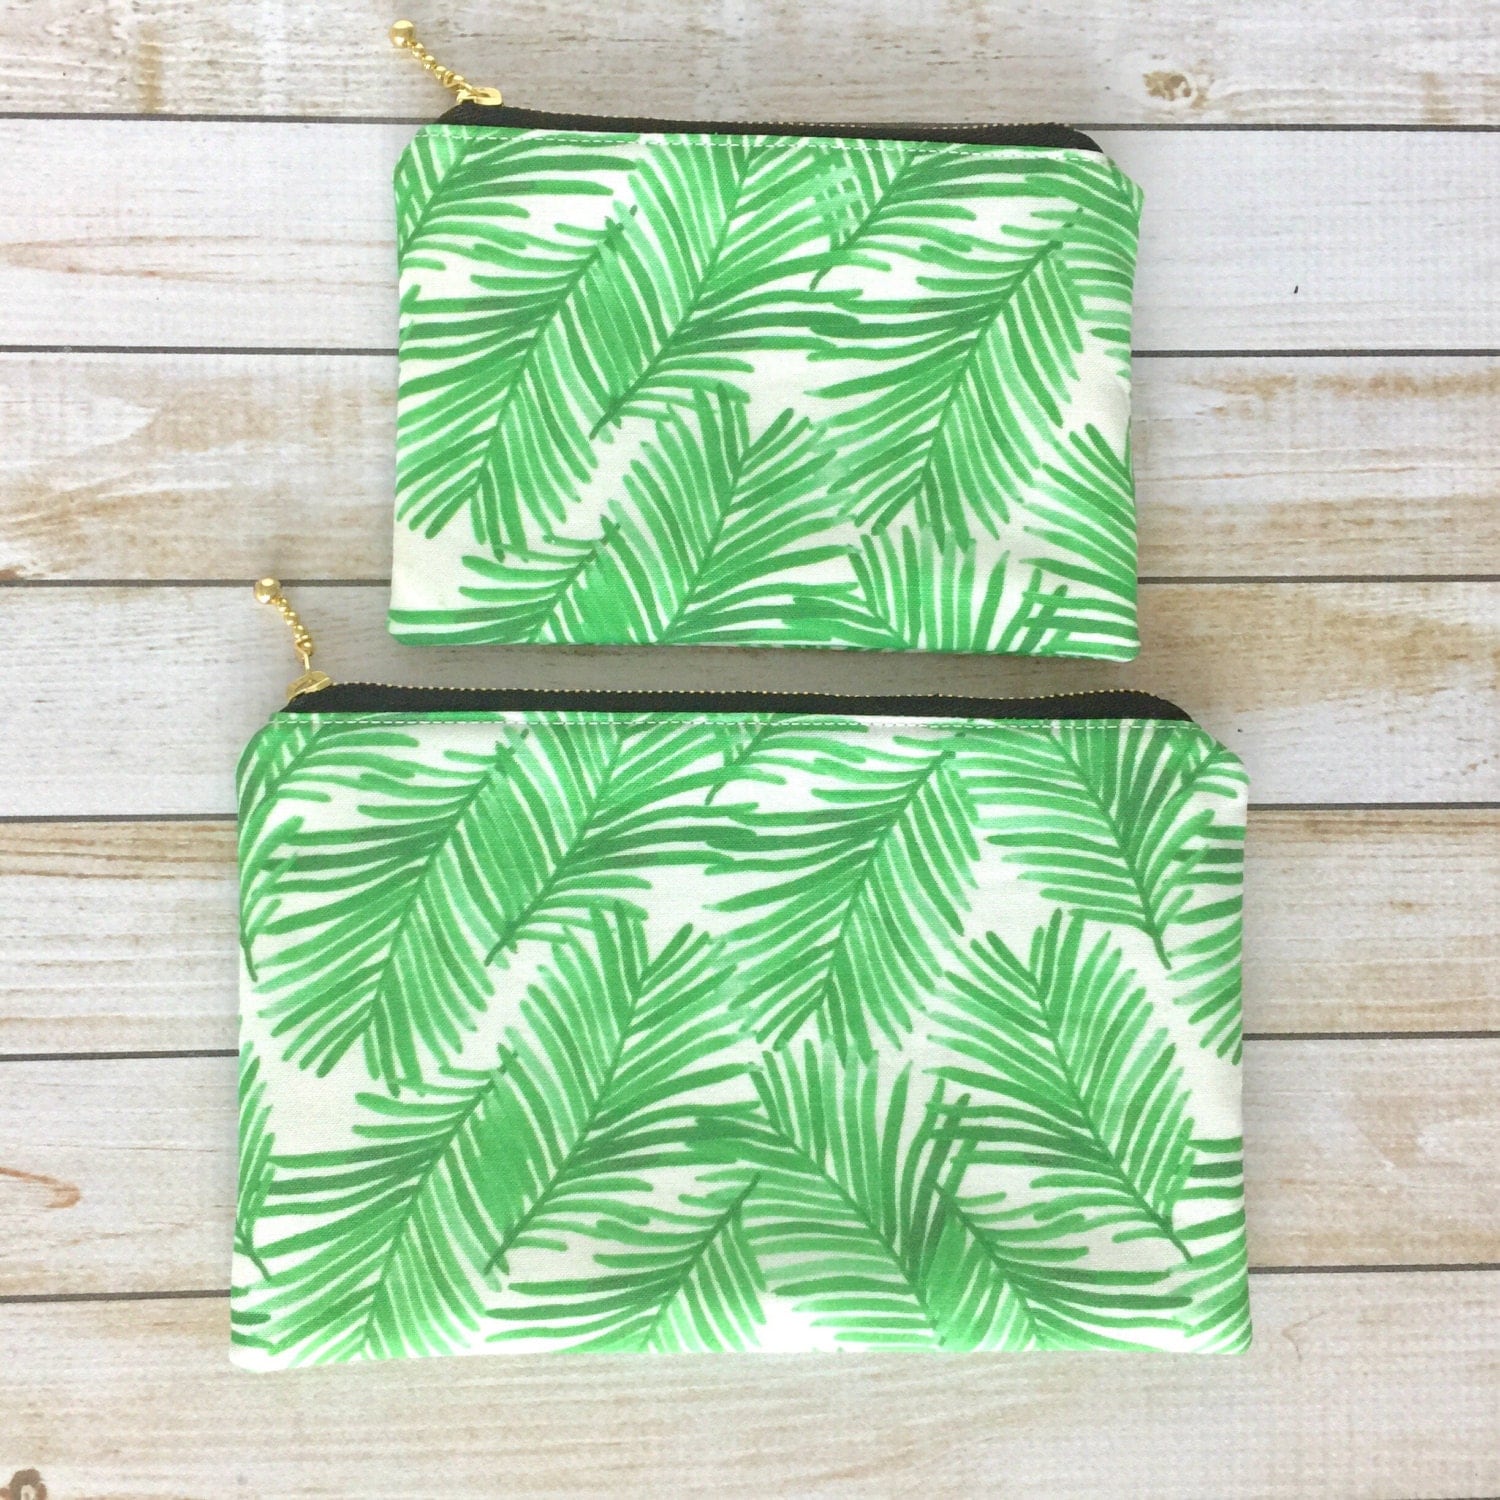 Green Palm Tree Leaves Zipper Pouch Gold Zipper Accessory Pouch Travel Pouch Holiday Gift Gifts For Her Coin Purse Pencil Pouch